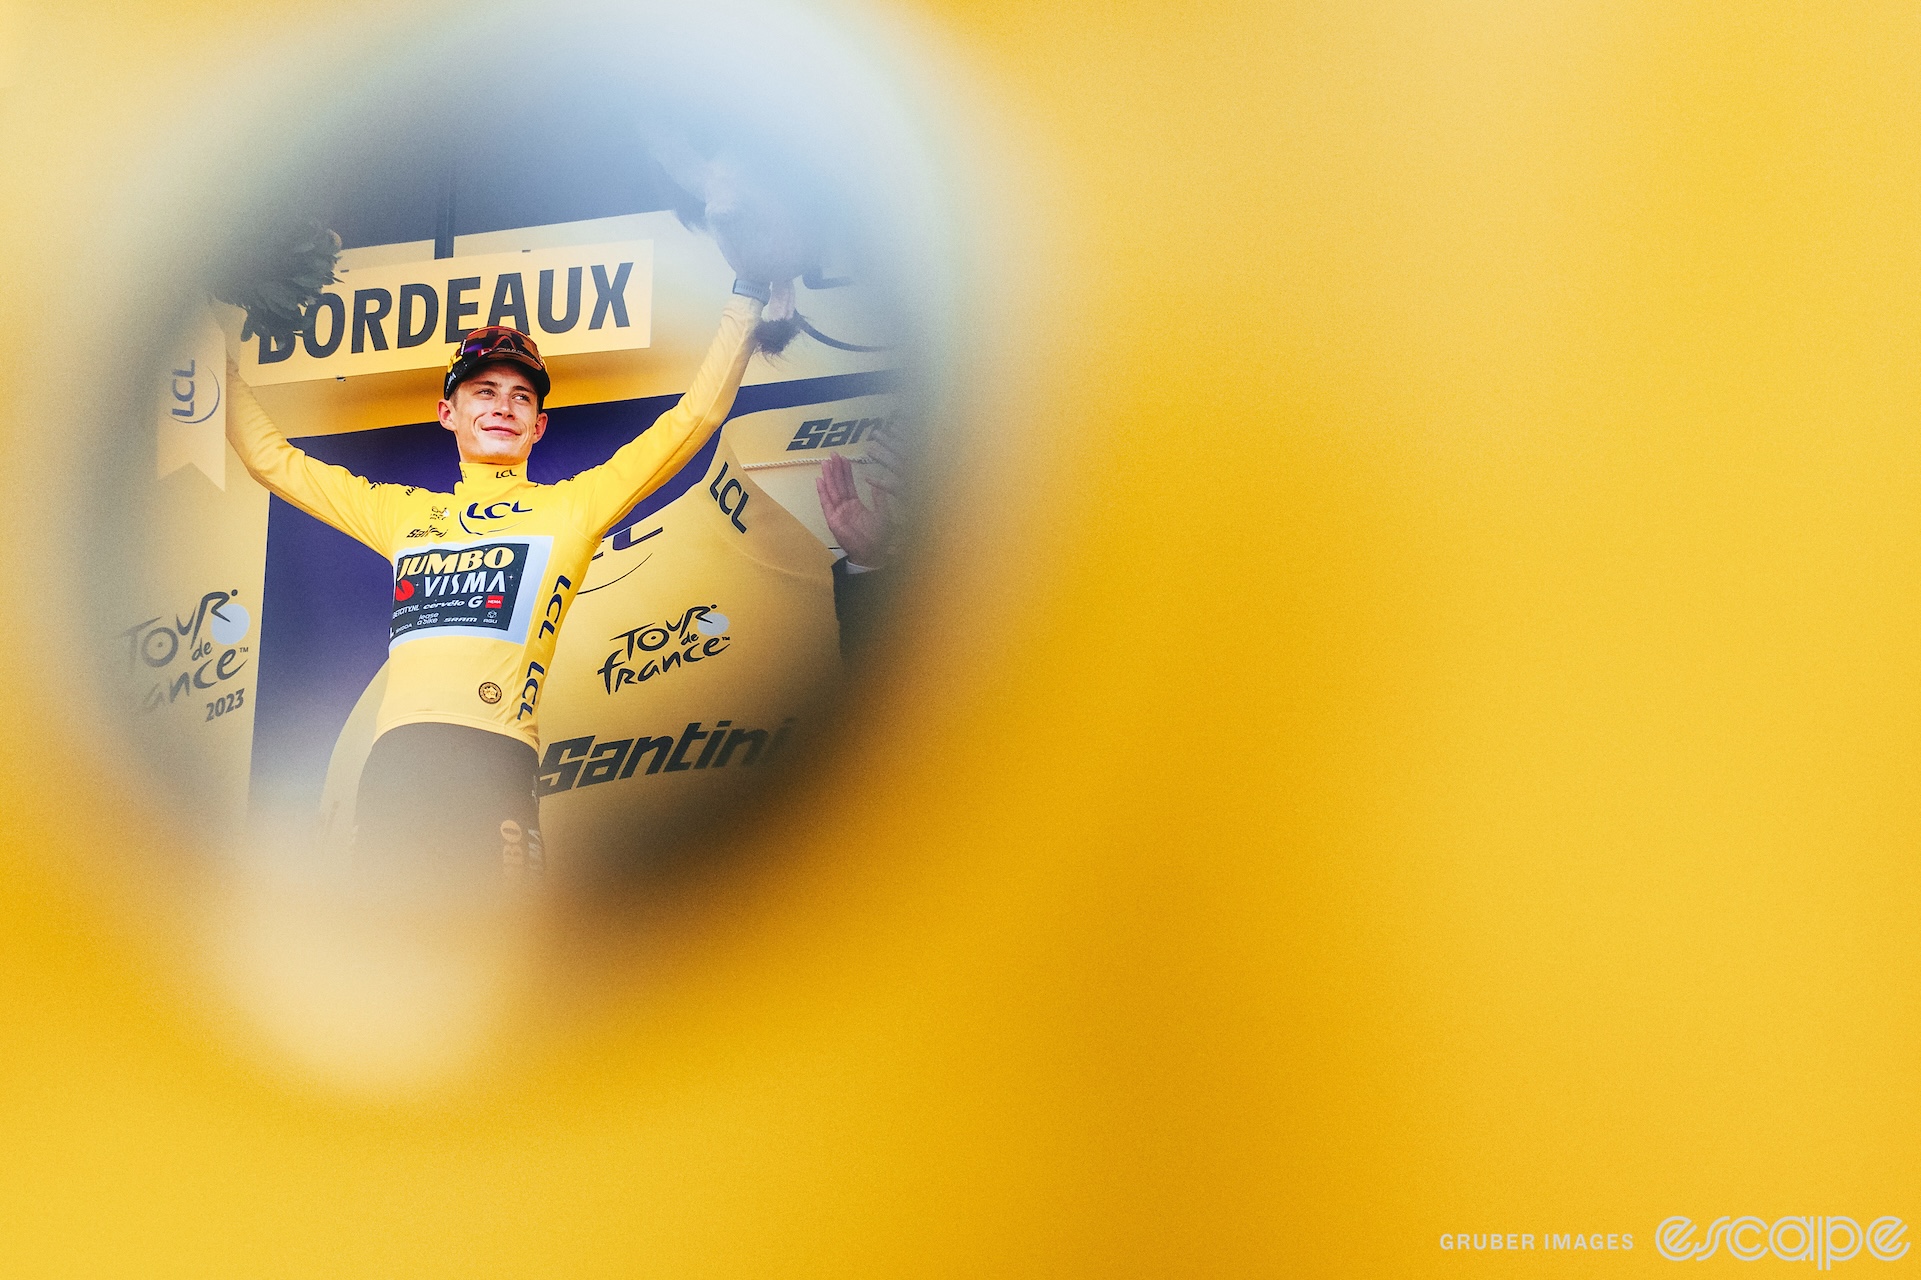 Jonas Vingegaard stands on the podium at the 2023 Tour de France in the yellow jersey with his arms raised. He's framed vignette-style through a hole in a blurry yellow flag or garment.